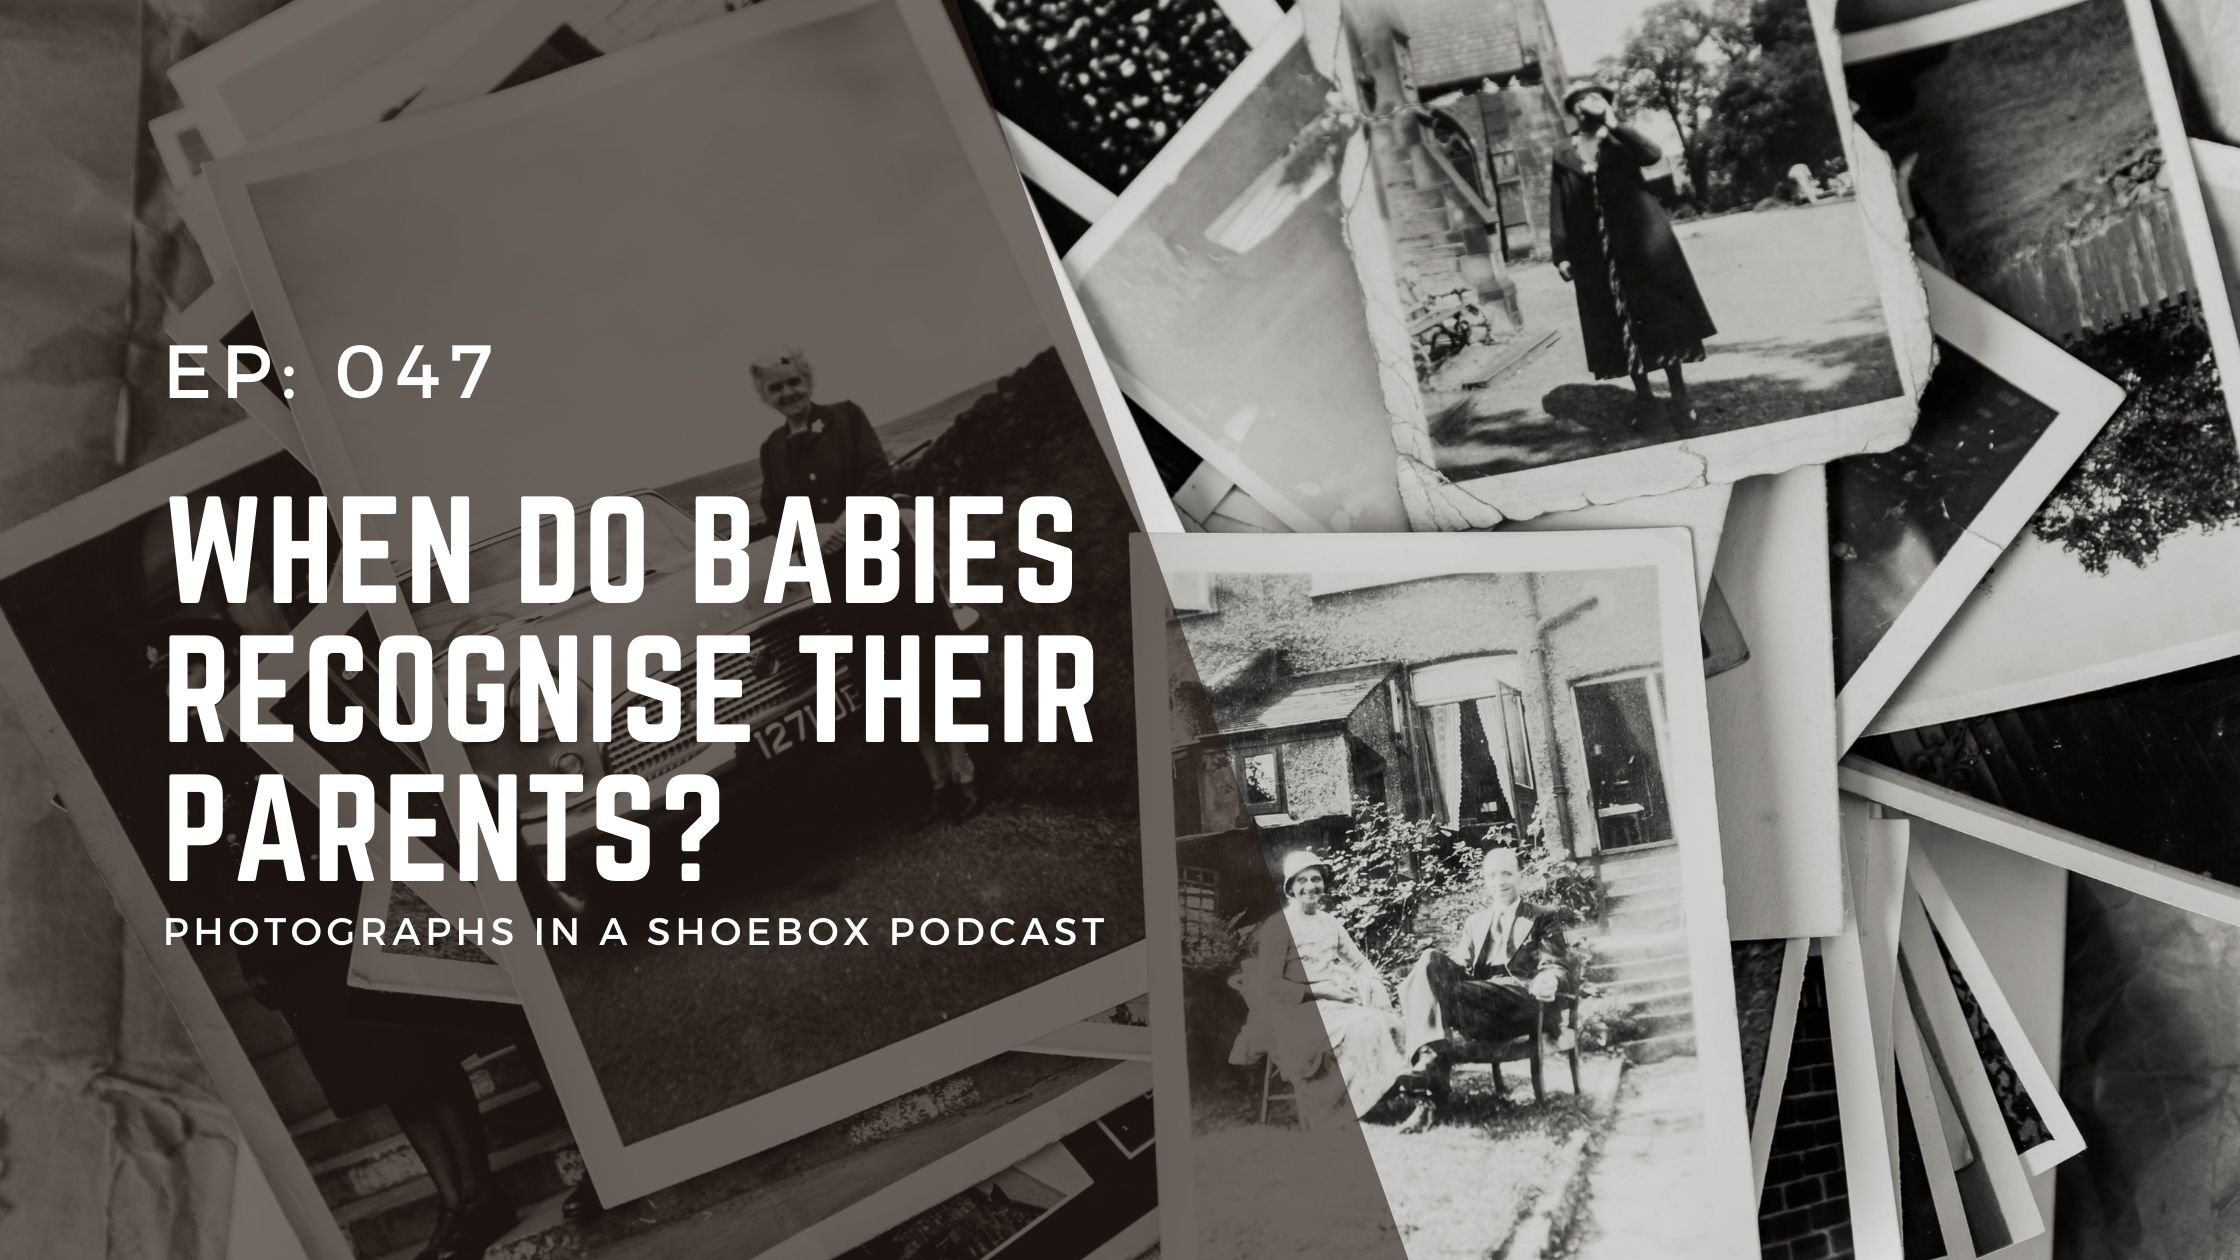 podcast artwork for the episode 47 when do babies recognise their parents?